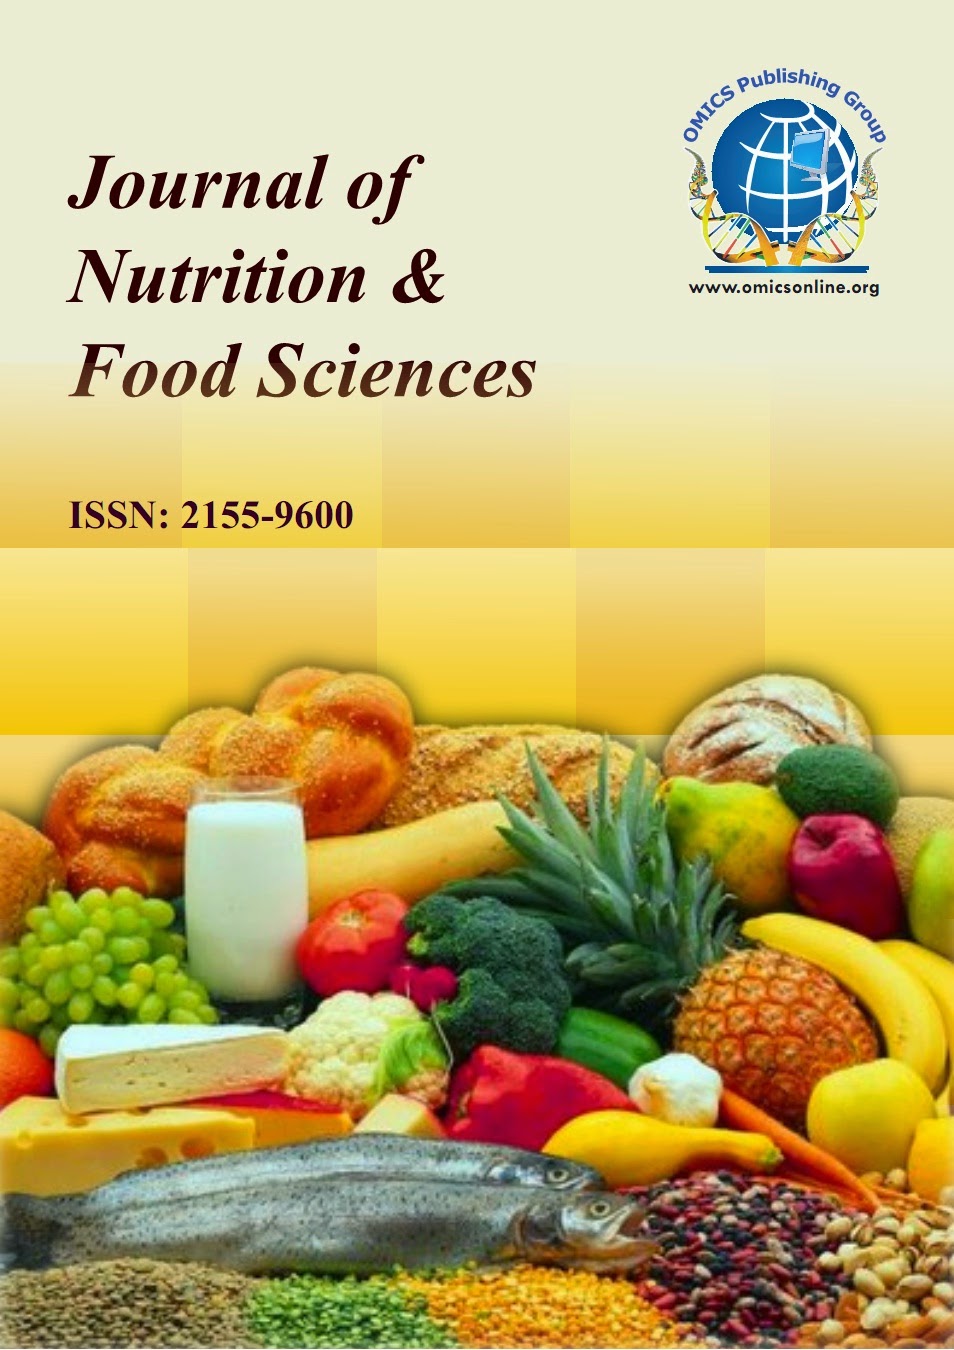 recent research topics in nutrition and dietetics